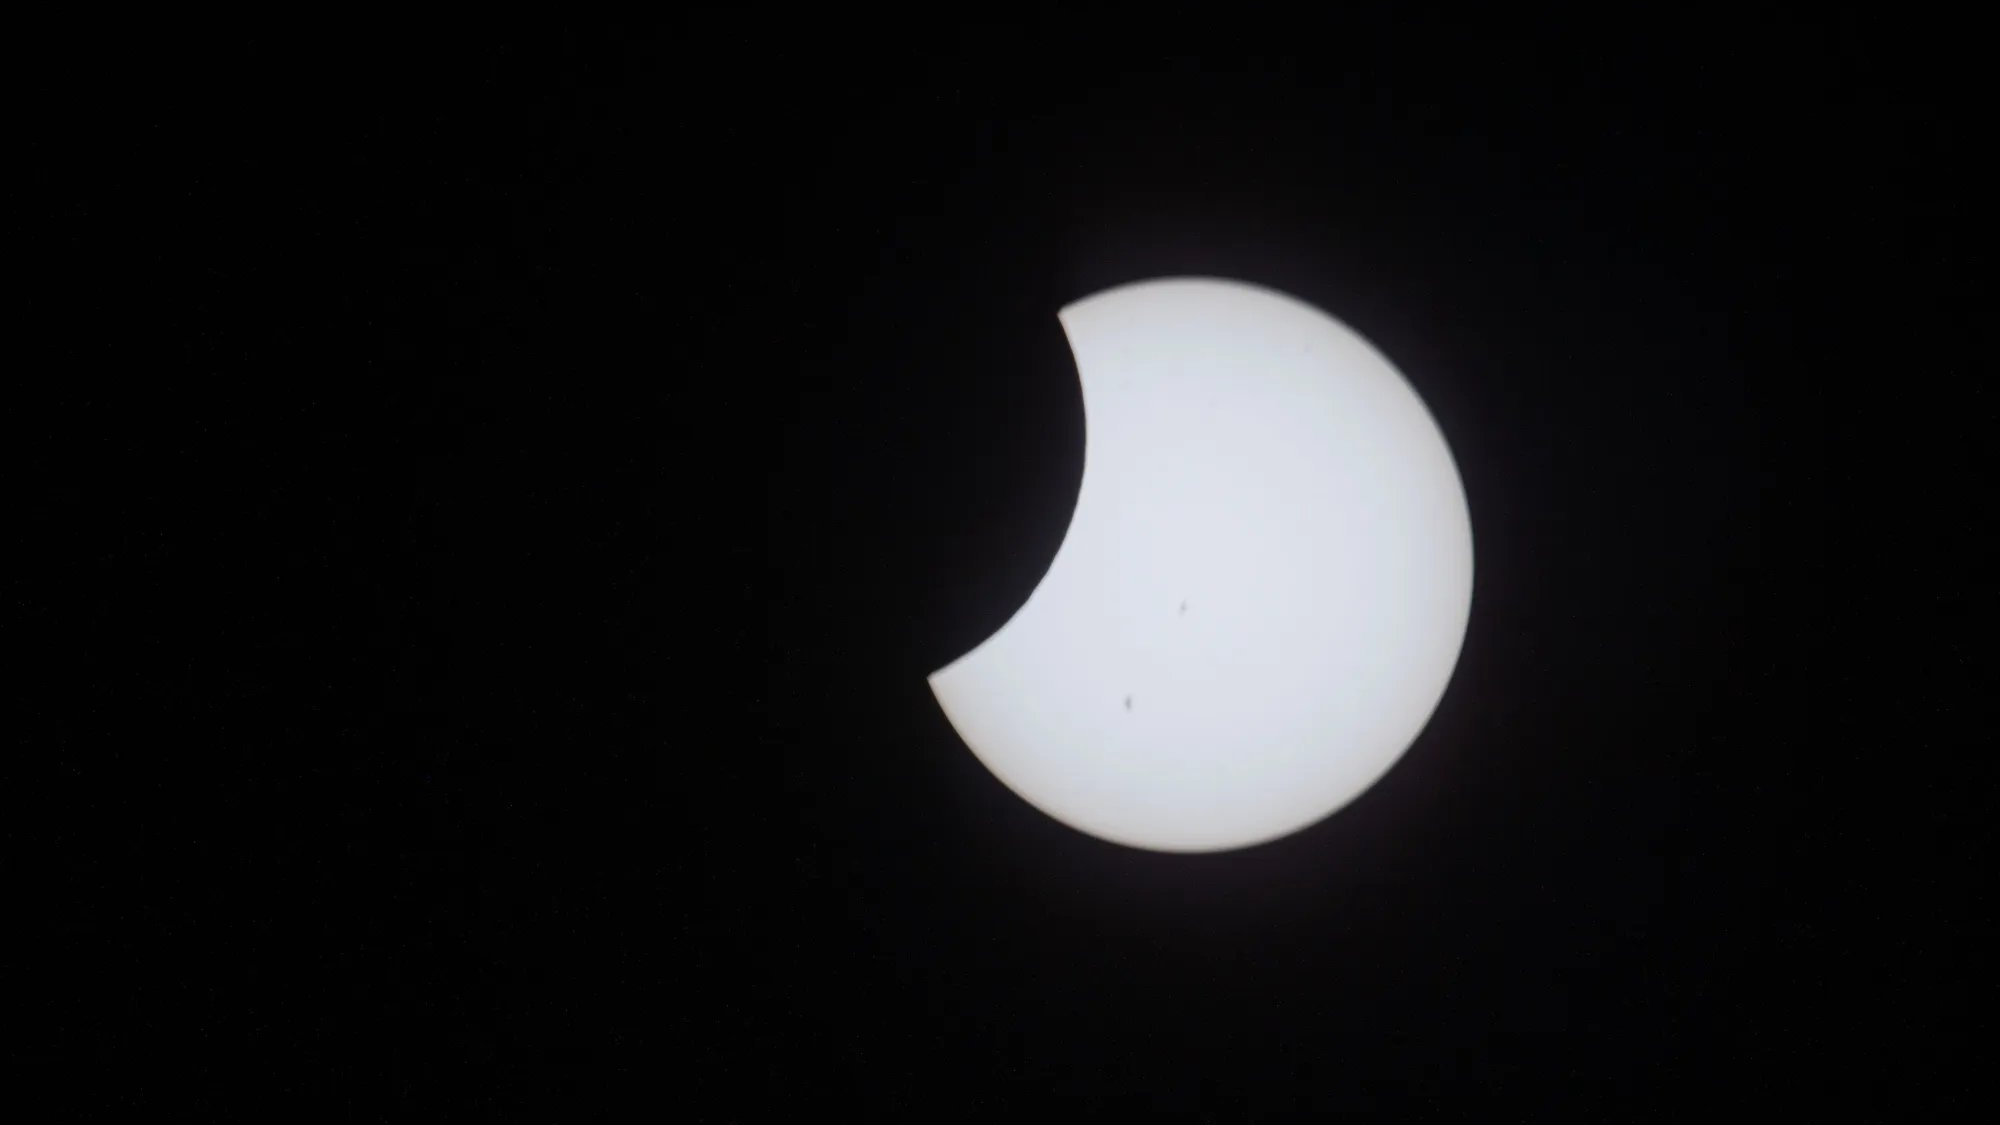 ISS astronauts ready to watch the solar eclipse from space on April 8